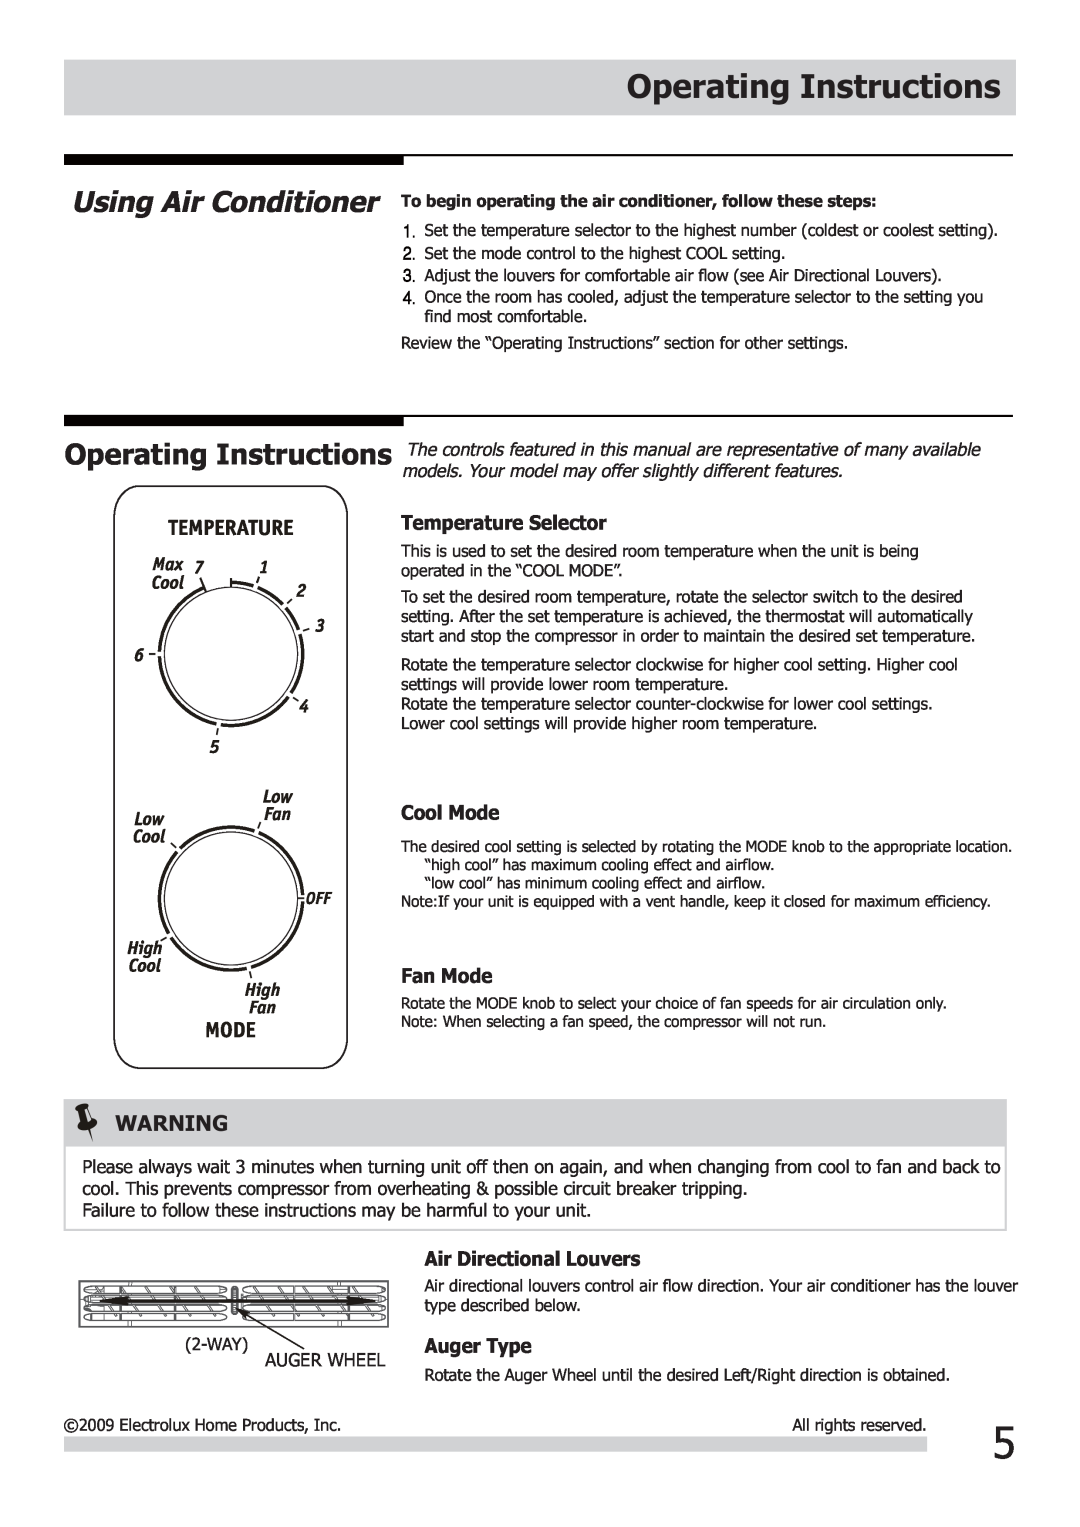 Frigidaire FRA052XT7, FRA053XT7 Operating Instructions, Temperature Selector, Cool Mode, Fan Mode, Air Directional Louvers 